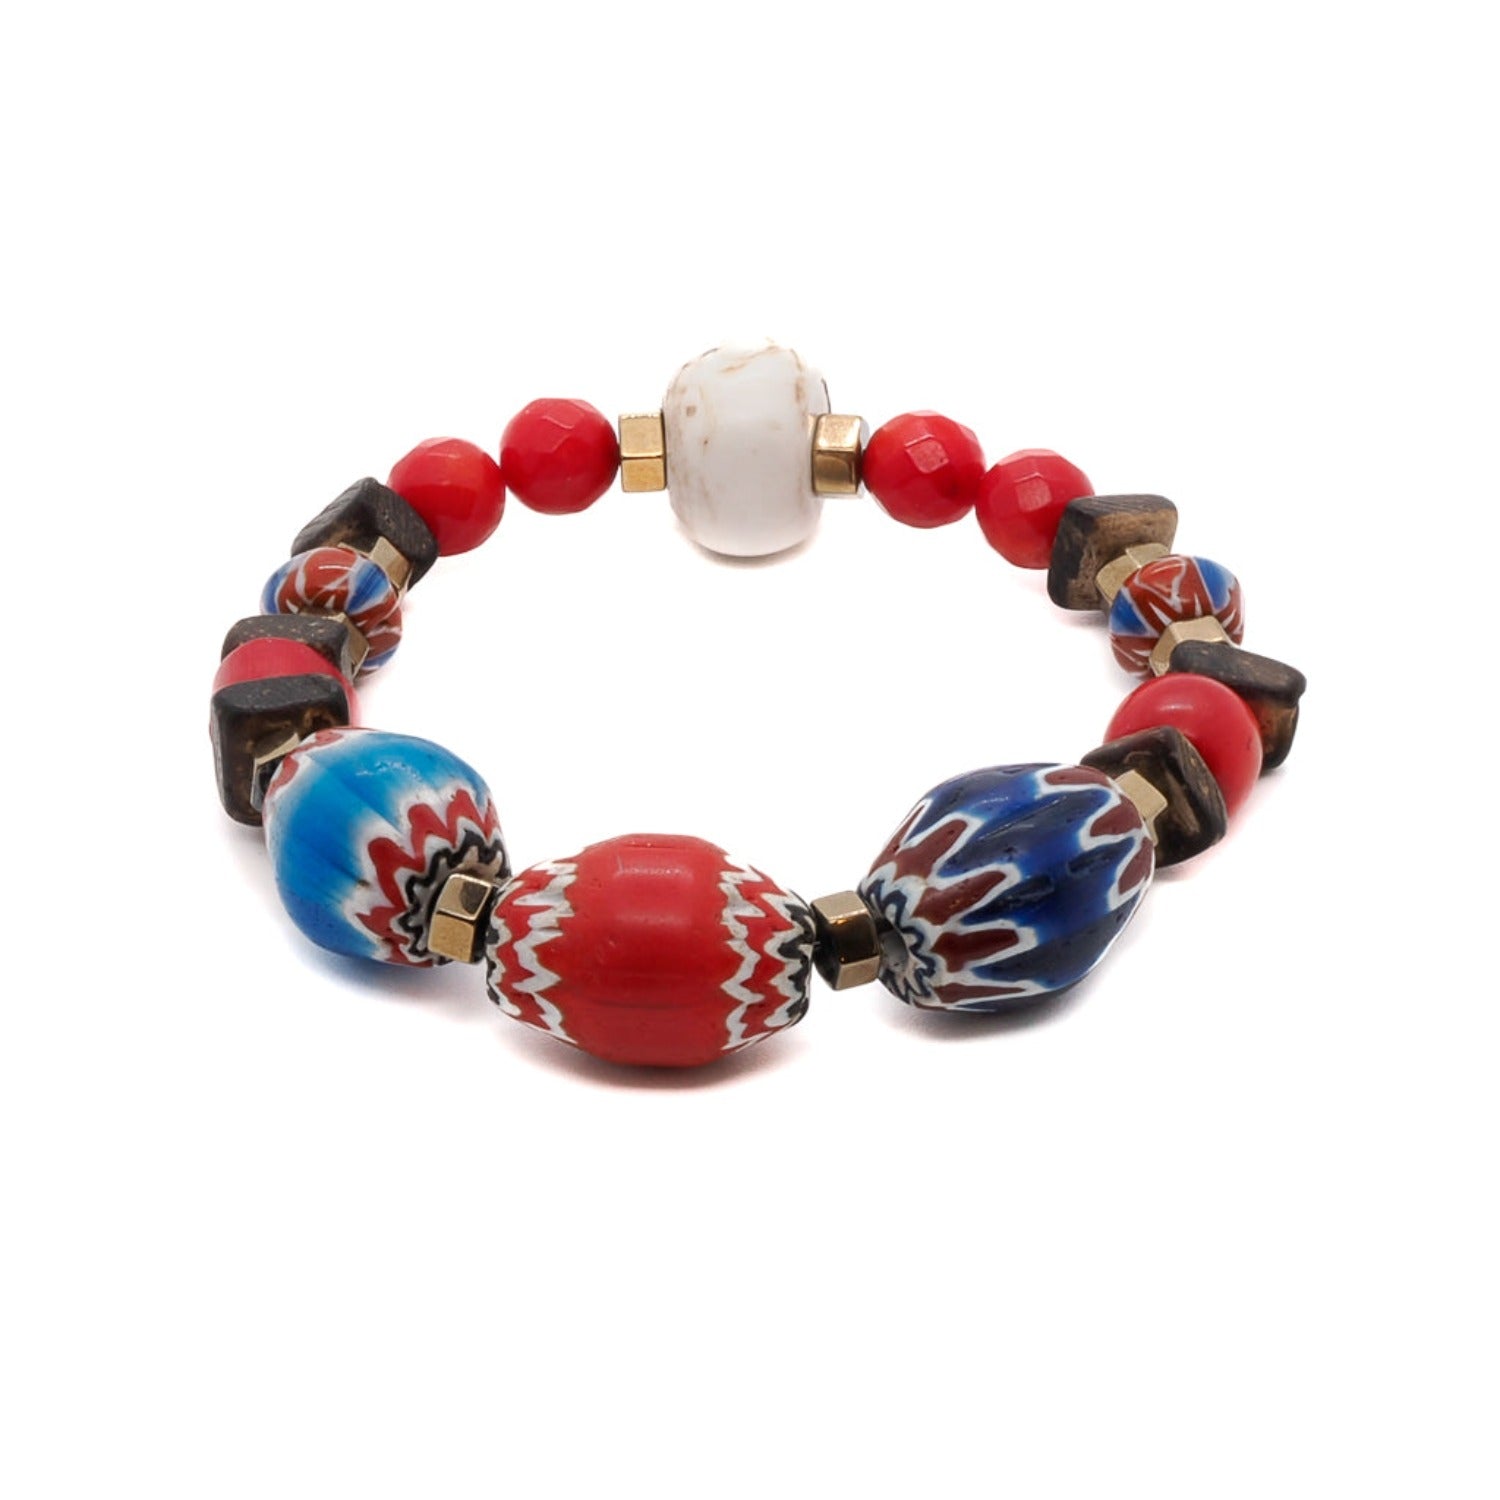 Embrace the unique beauty of the Palena Bracelet, a handmade accessory featuring African beads and red coral stone.